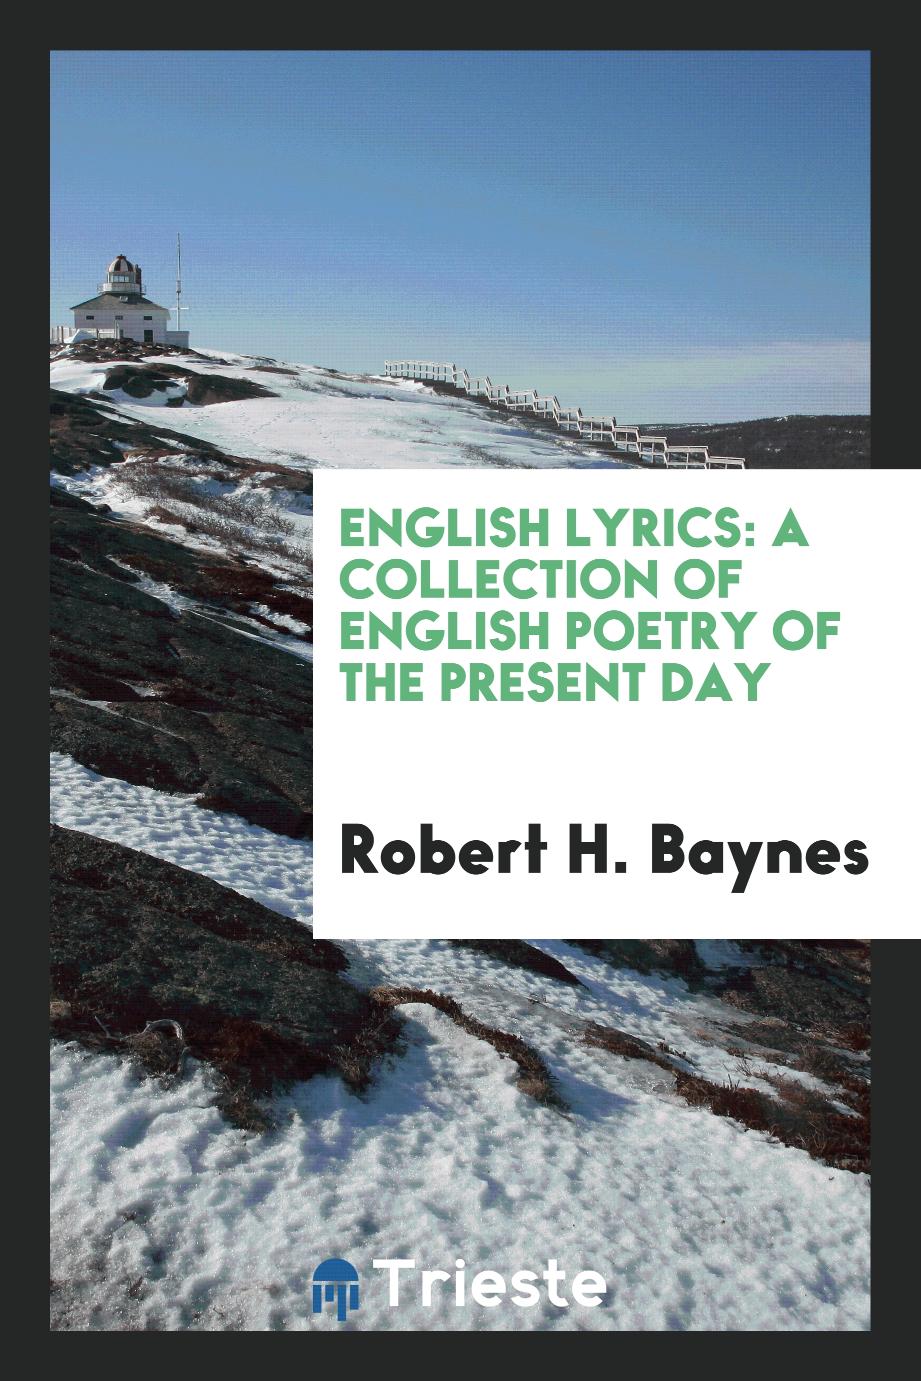 English Lyrics: A Collection of English Poetry of the Present Day